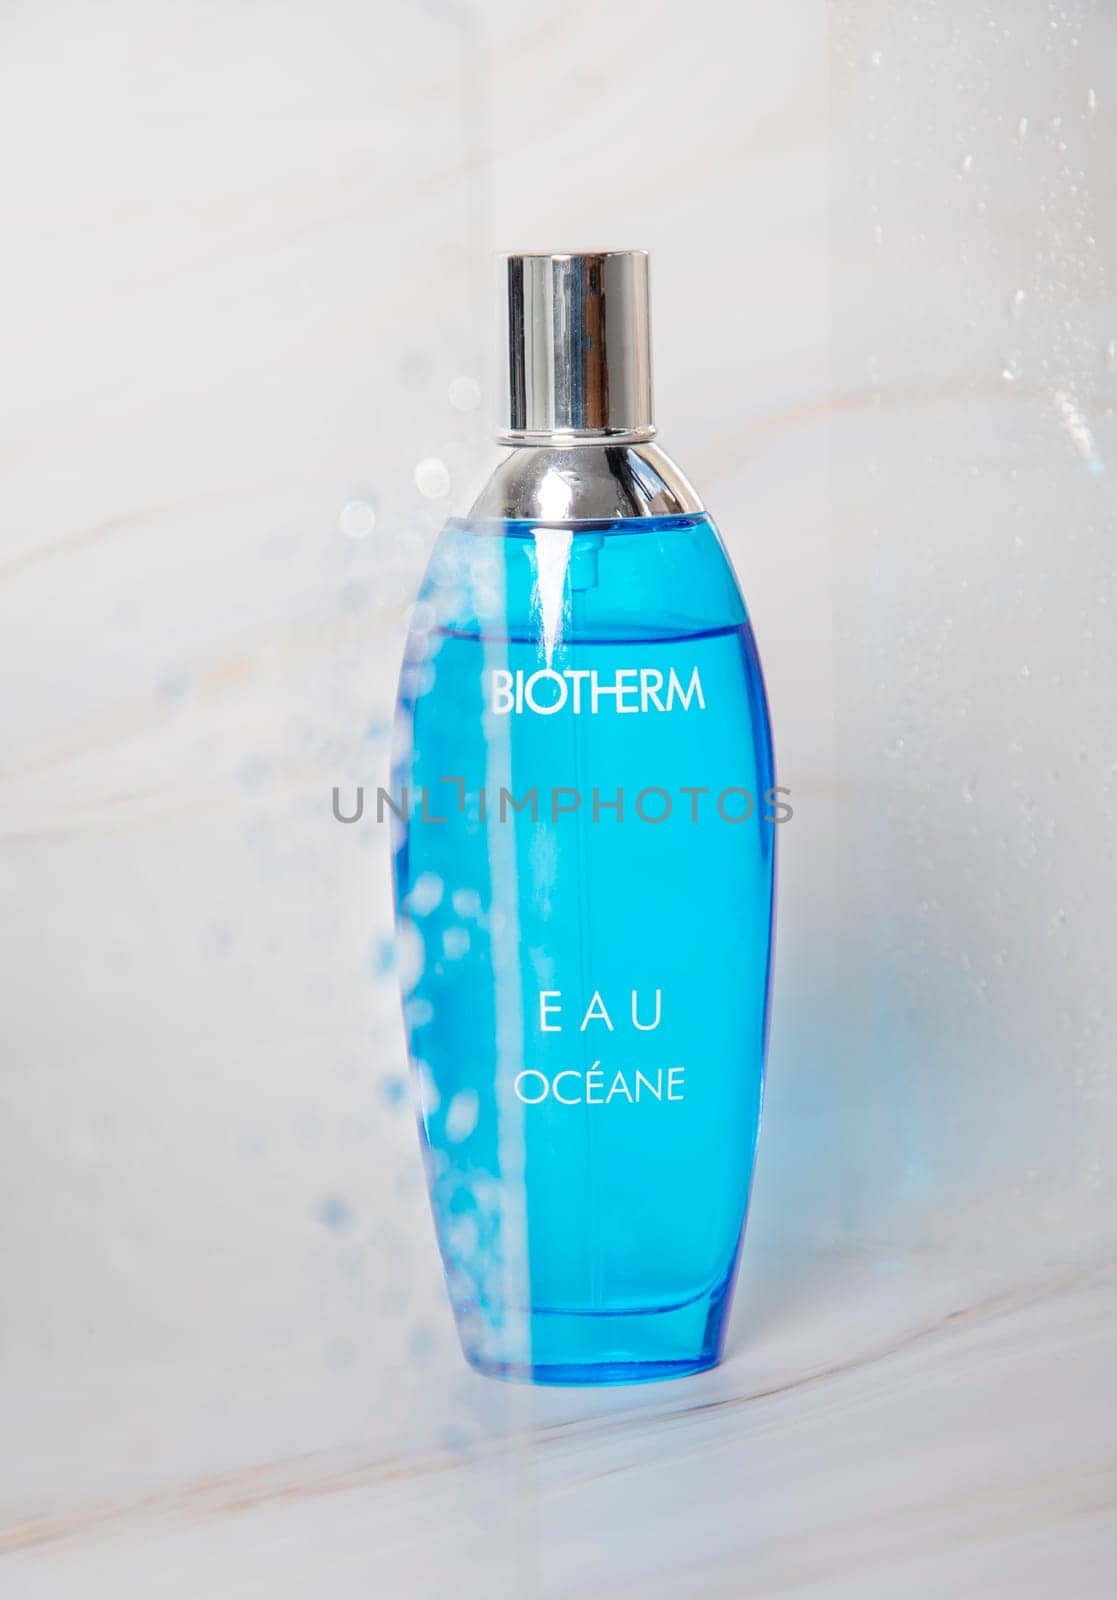 Biotherm Eau Oceane, fresh summer floral aquatic scent Swedish perfume and cosmetics brand, romantic and light mood, product photography, As,Belgium, Juny 28, 2022, High quality photo